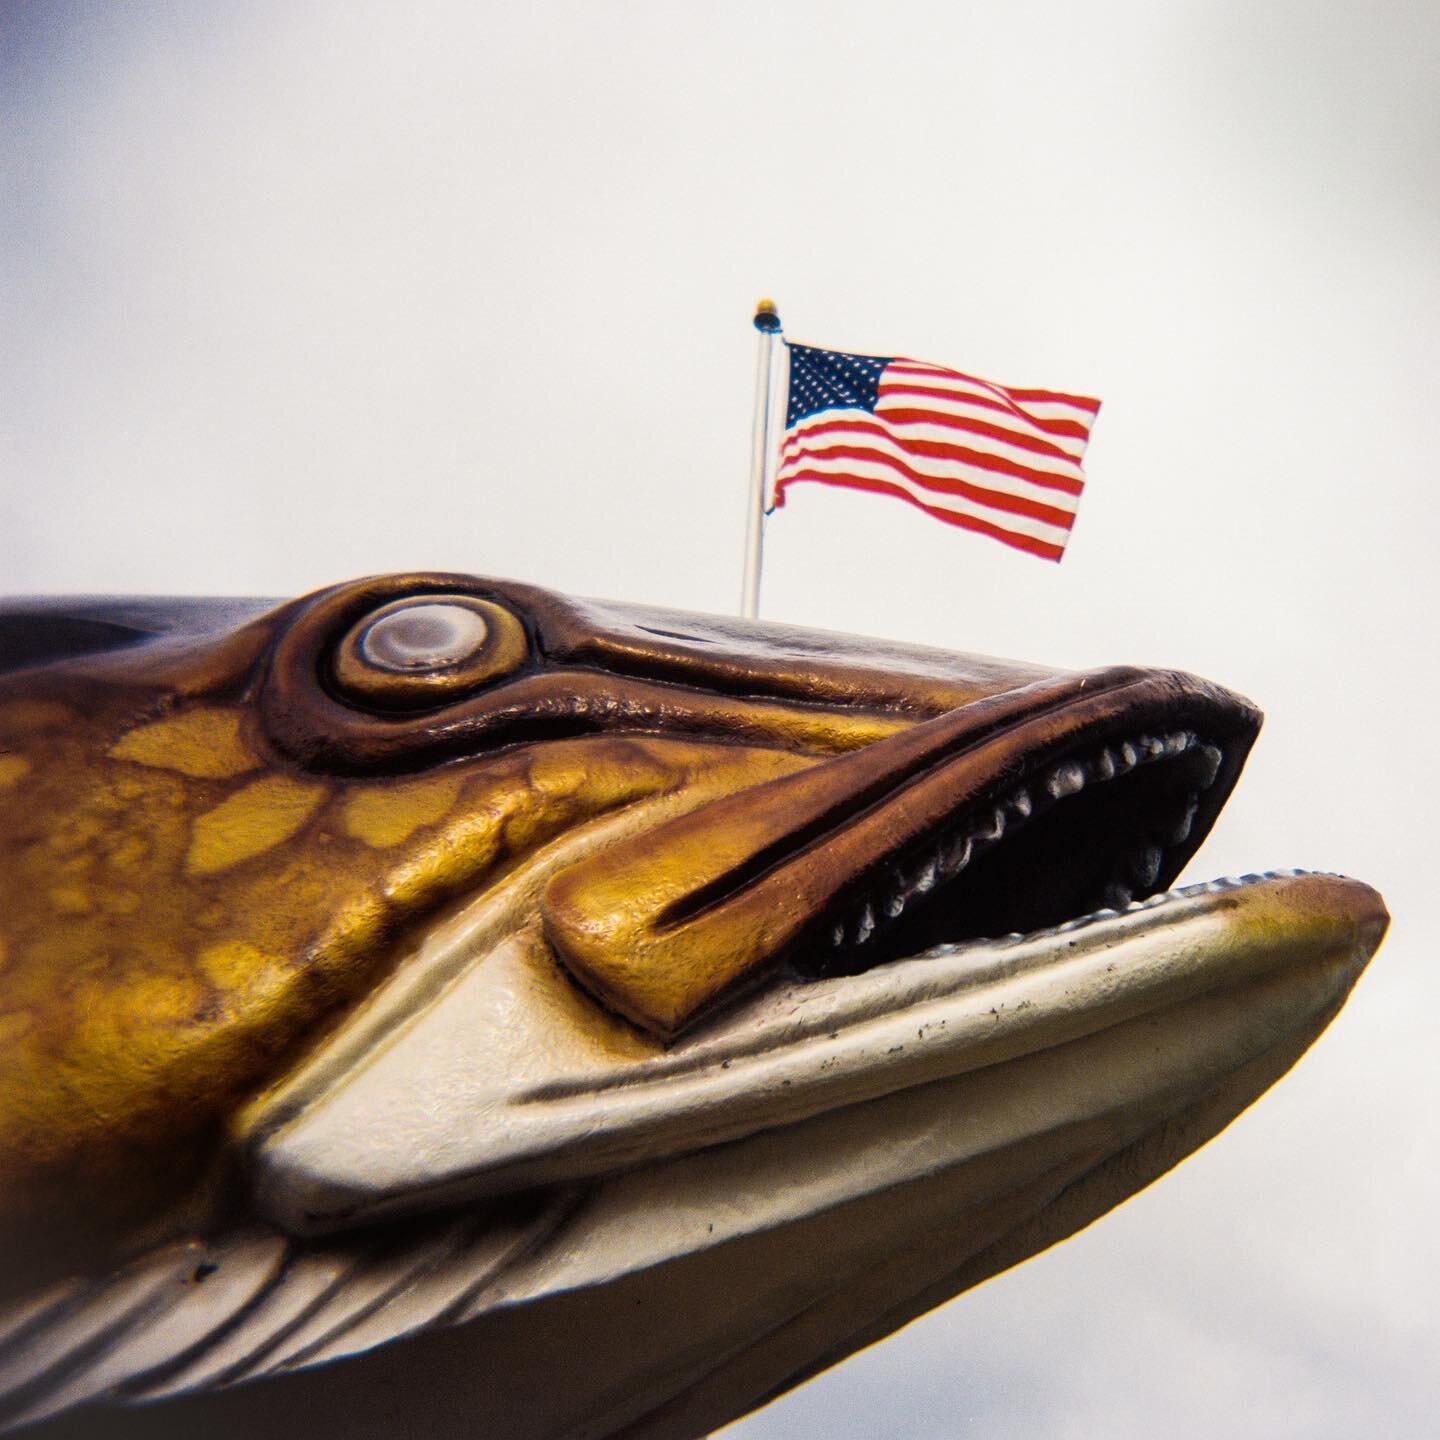 Happy 4th of July to my friends around the world who partake. And to those who don't, here's a photo of a fish statue.